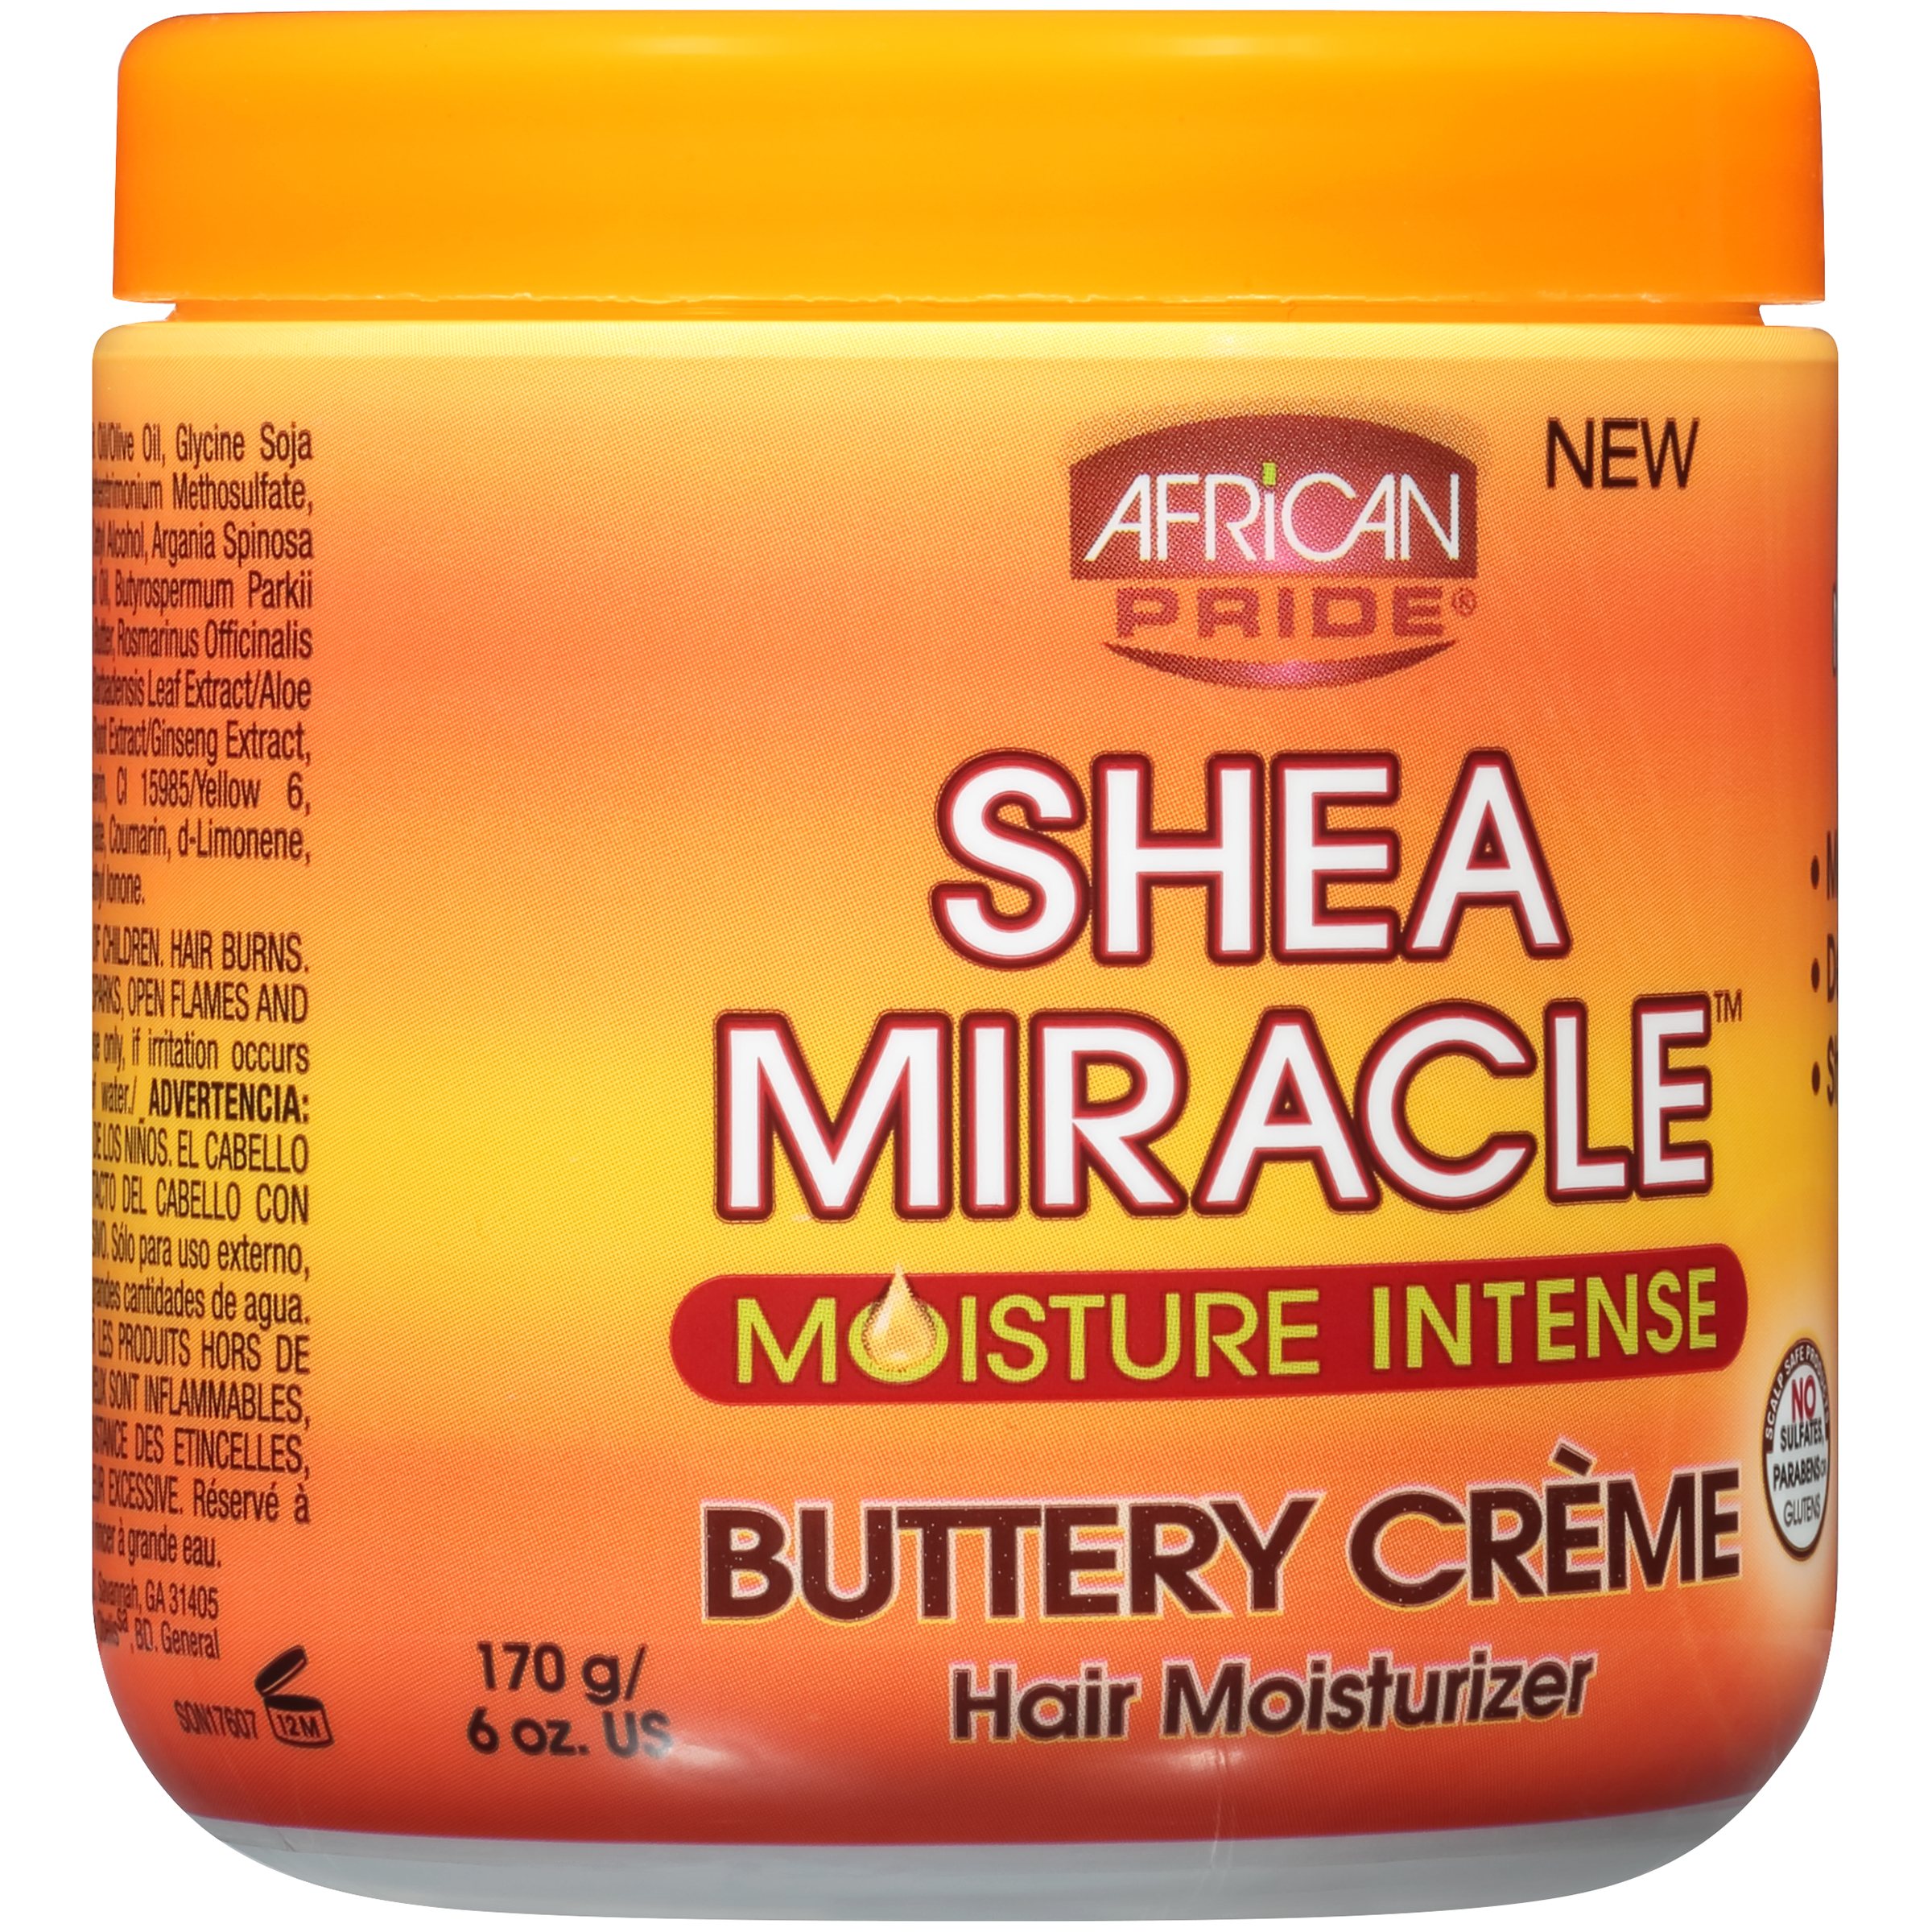 African Pride Shea Miracle Moisture Intense Buttery Leave In Cream Hair Moisturizer for Wavy, Curly, Coily Hair with Shea Butter, 6 oz. - image 5 of 6